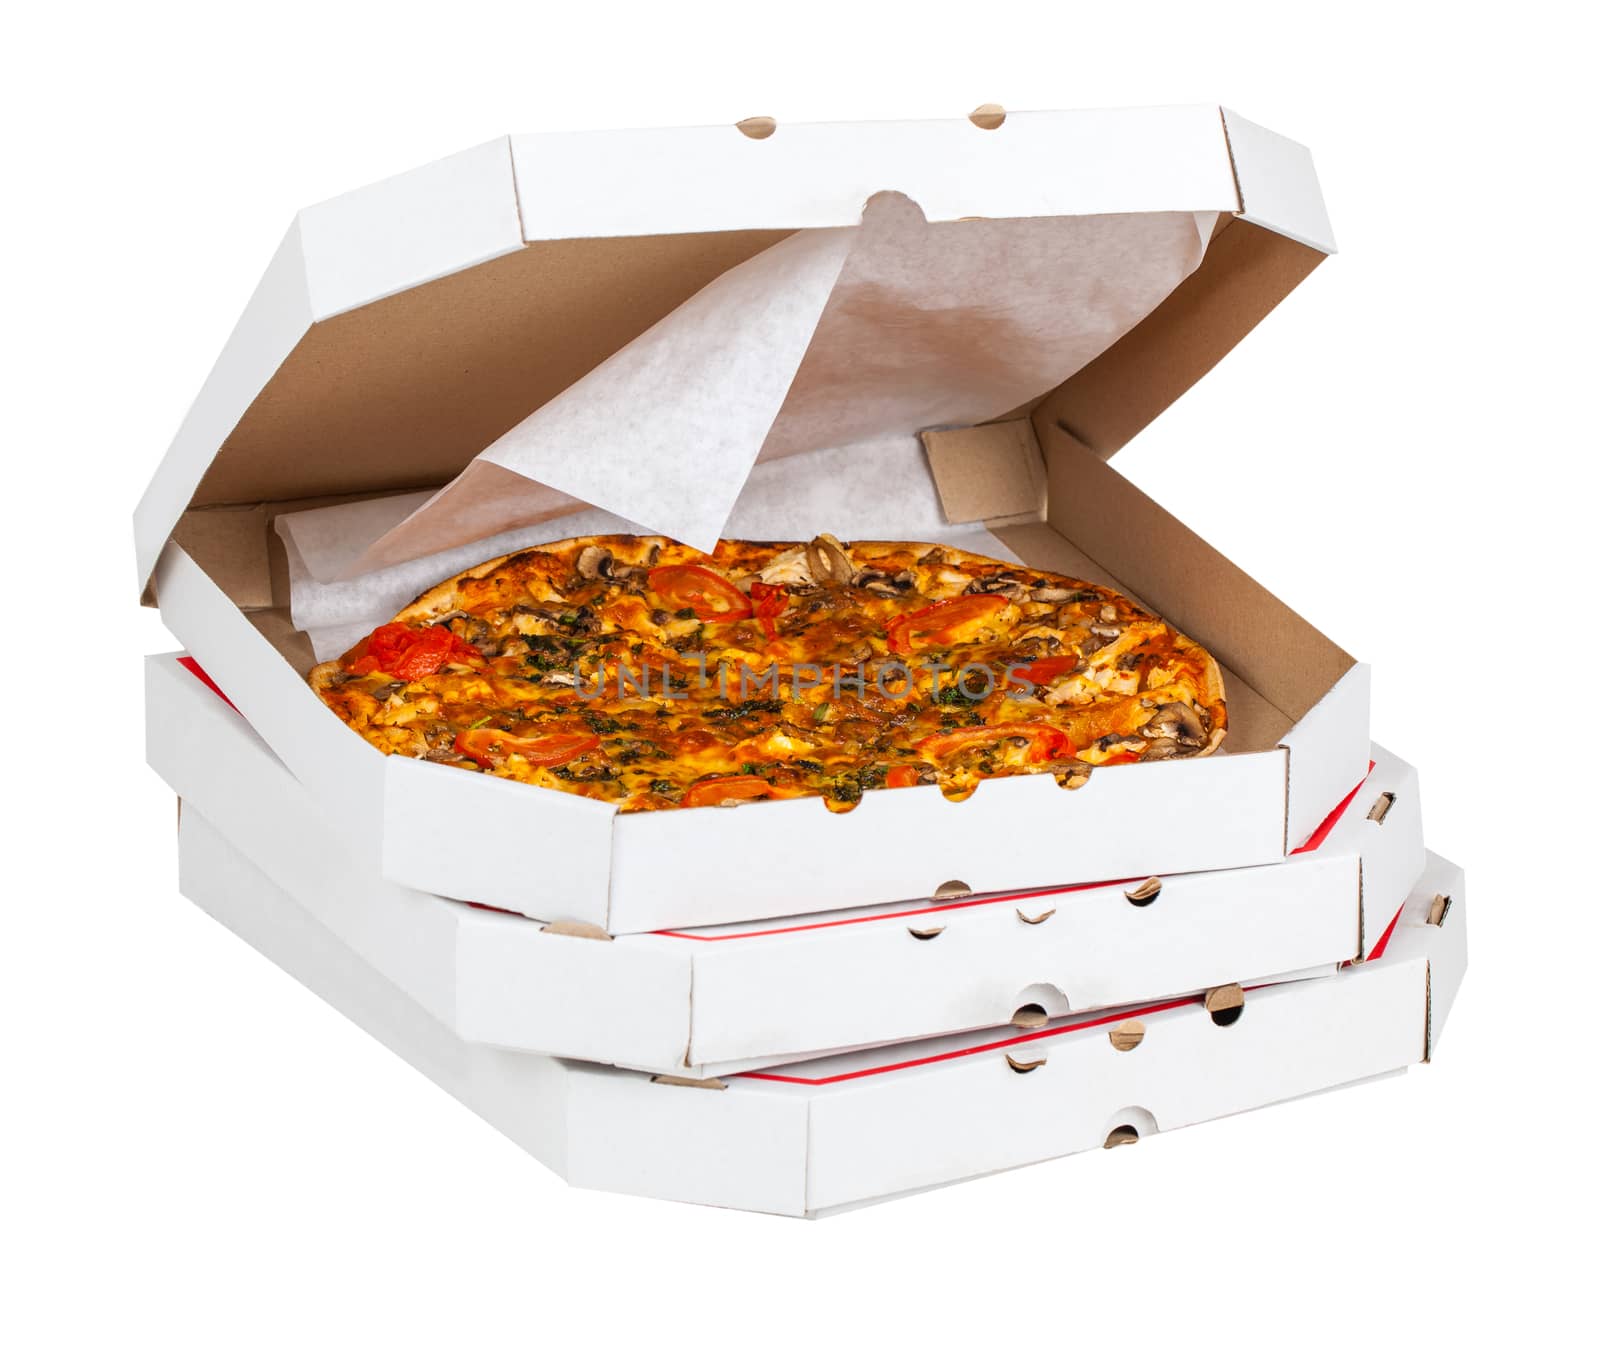 hot pizza in open box isolated on a white background